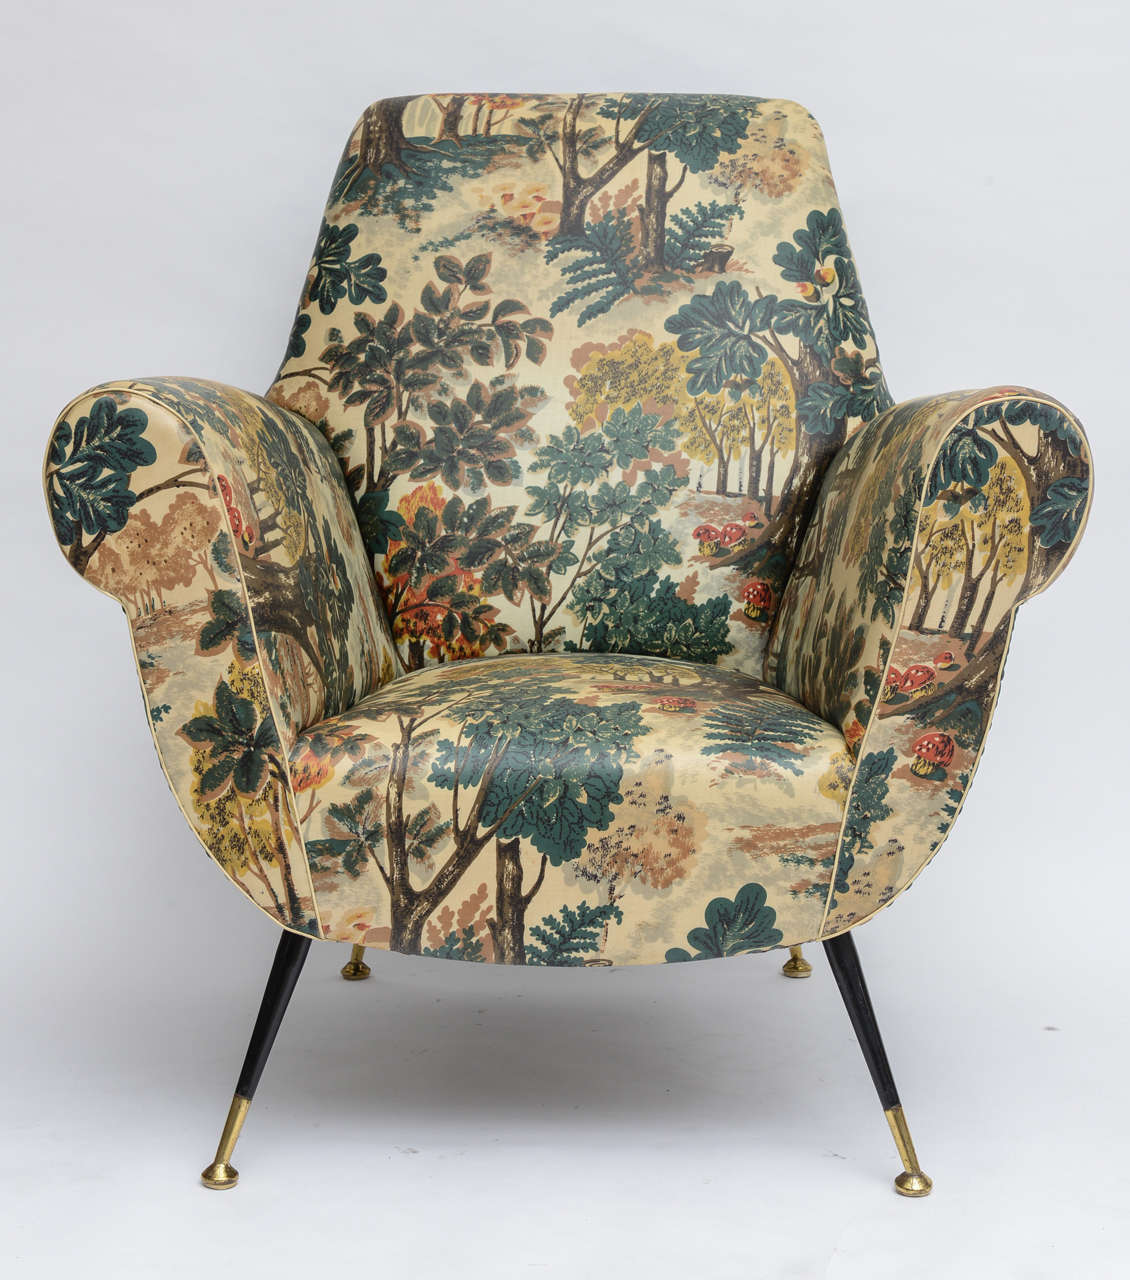 We couldn't bare to change the original upholstery on this 50's Italian lounge chair! Back and sides are forest green vinyl, while the seat and arms are a vinyl-coated cotton with a whimsical, woodland print. (We imagine it today in the chicest